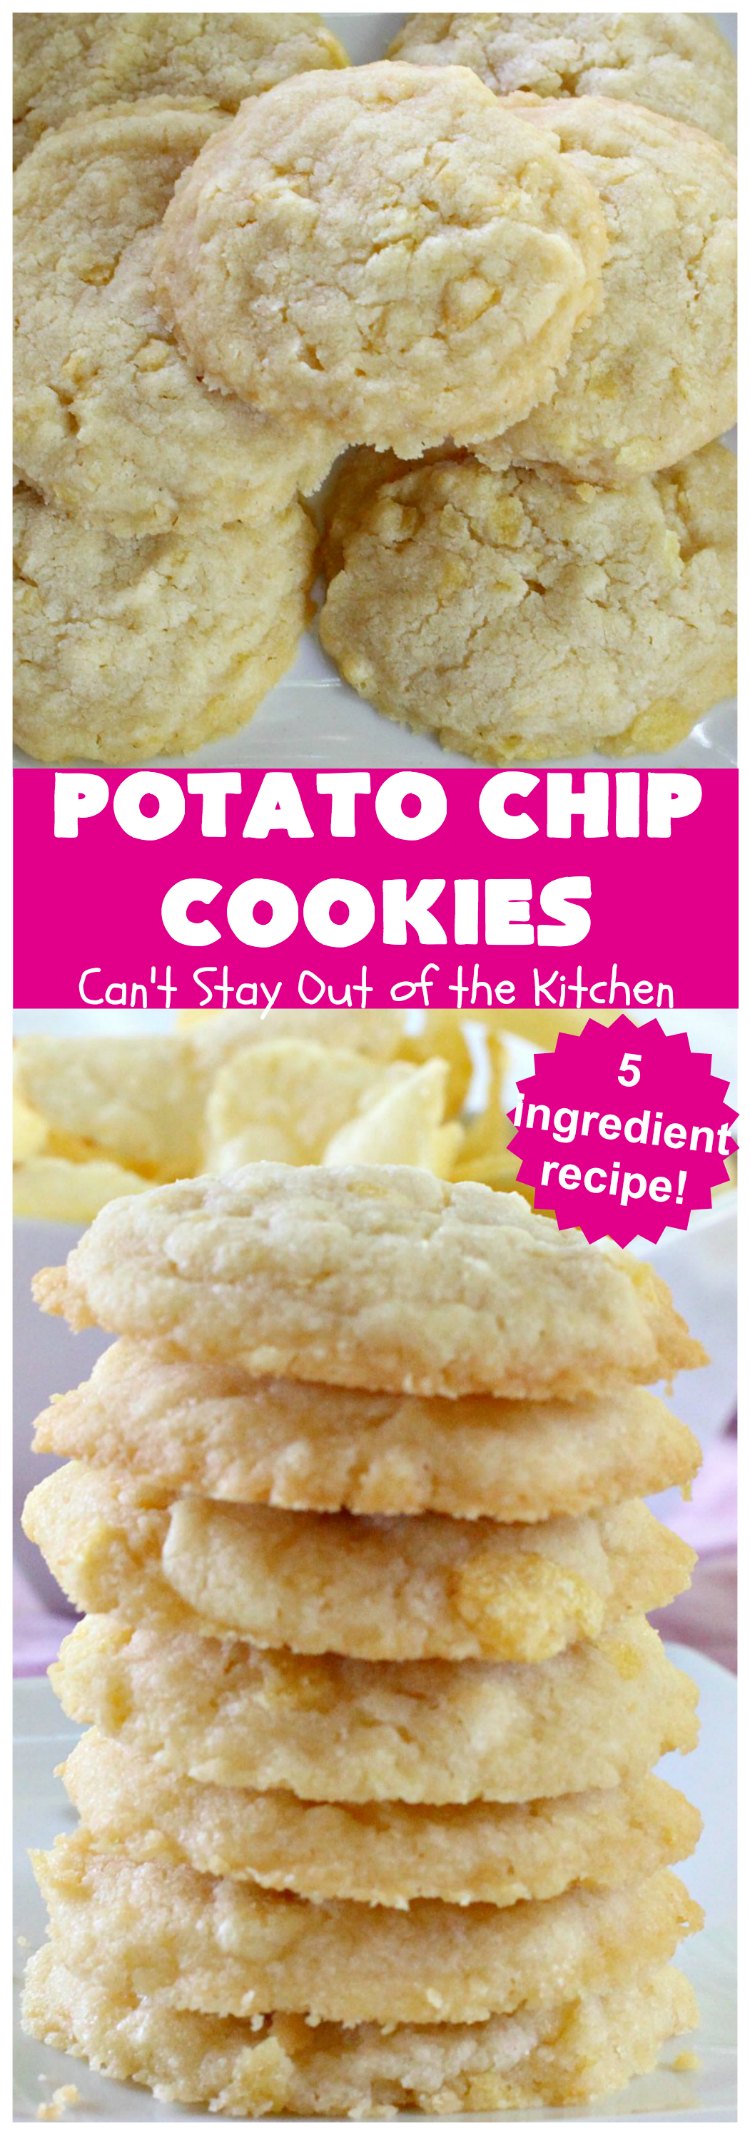 Potato Chip Cookies | Can't Stay Out of the Kitchen